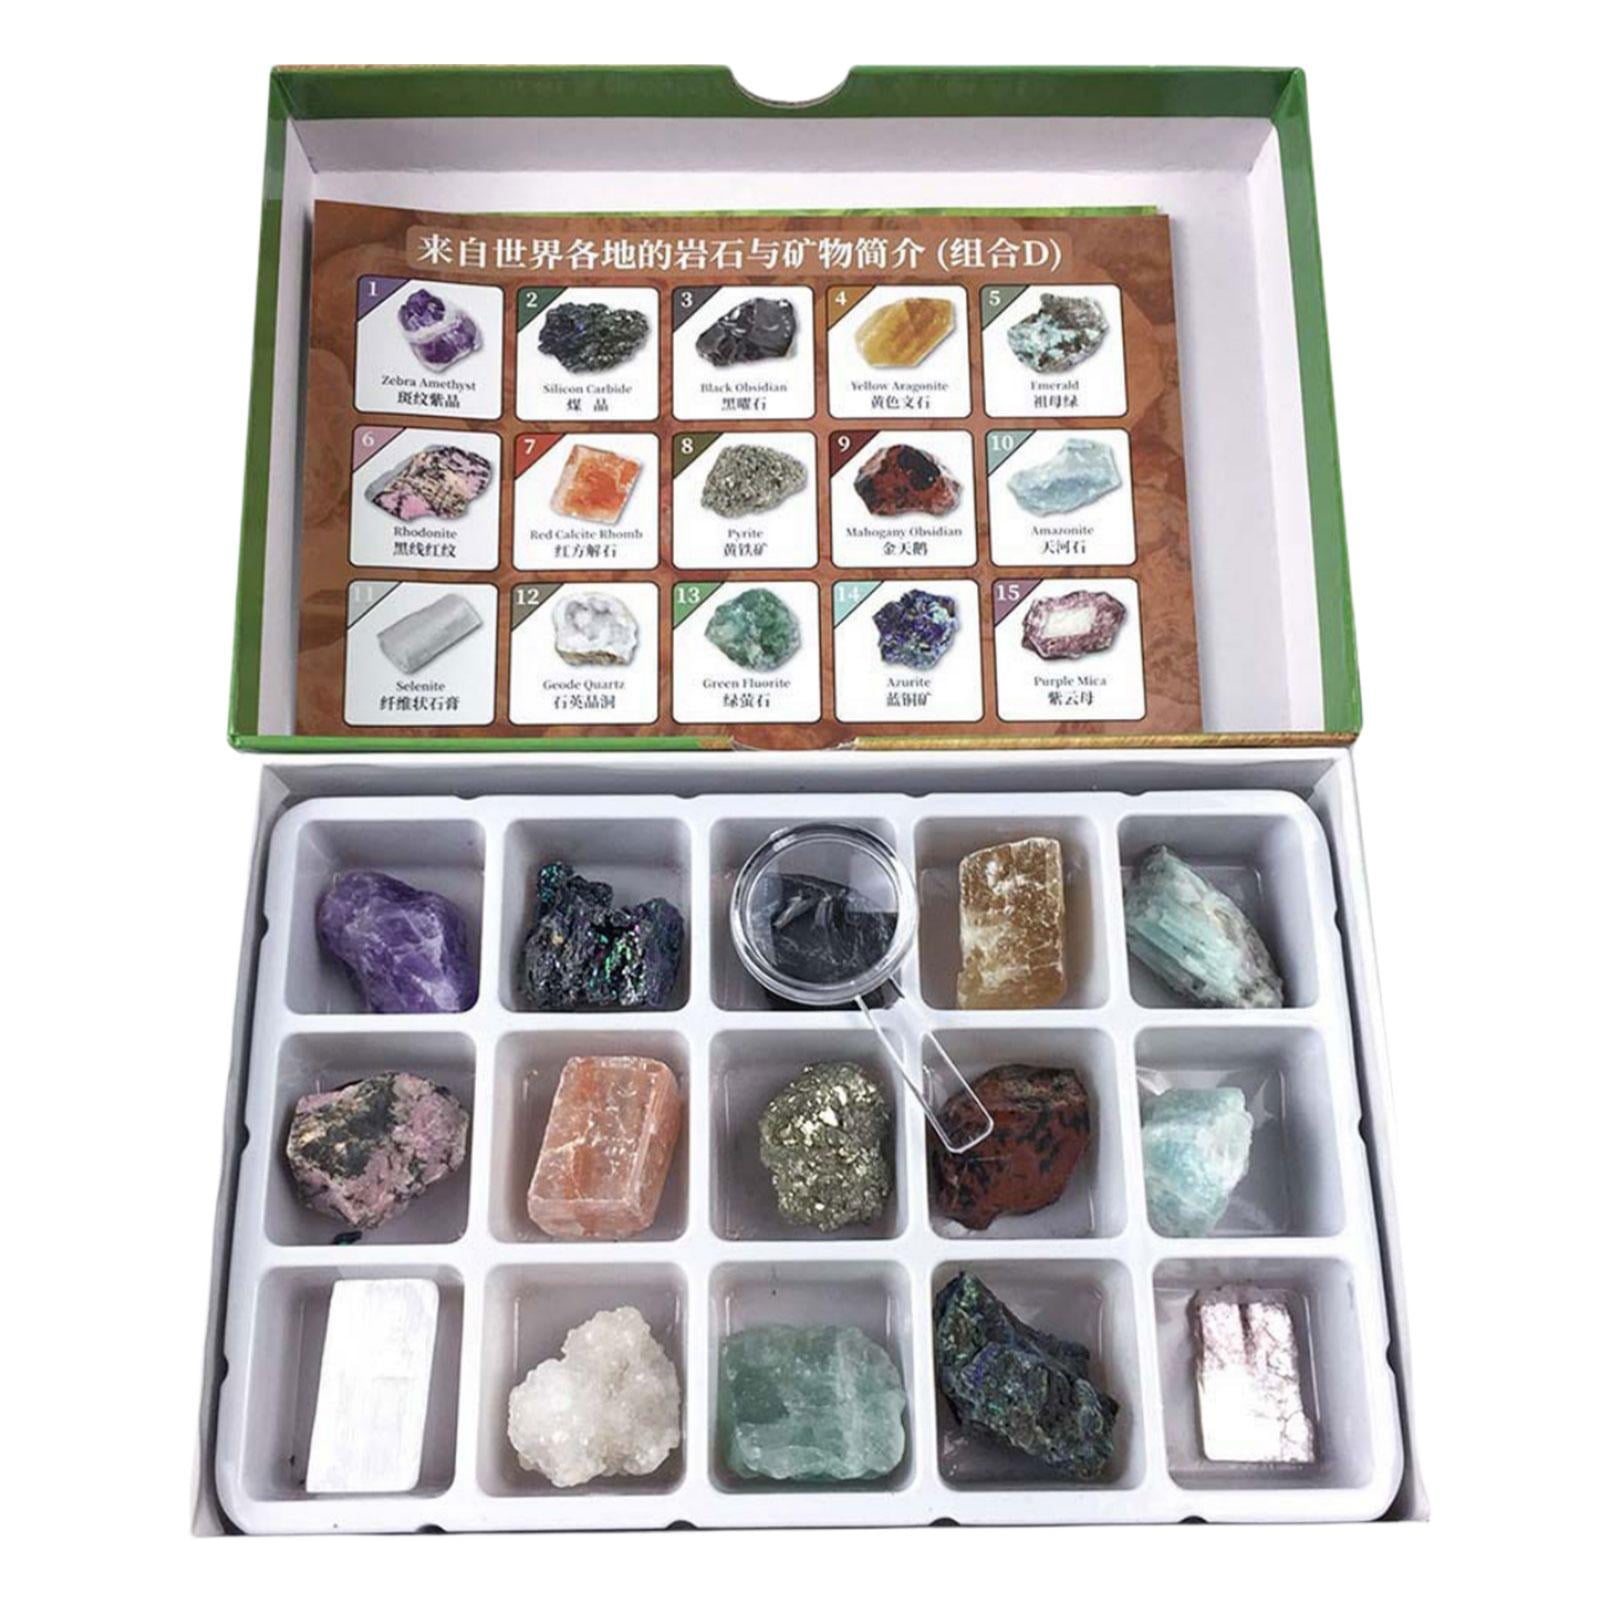 EDUMAN Rocks ＆ Minerals Collection - Rock Collection Box for Kids, 16pcs  Real Gemstones and Crystals, Great STEM Educational Geology Kit for Ages